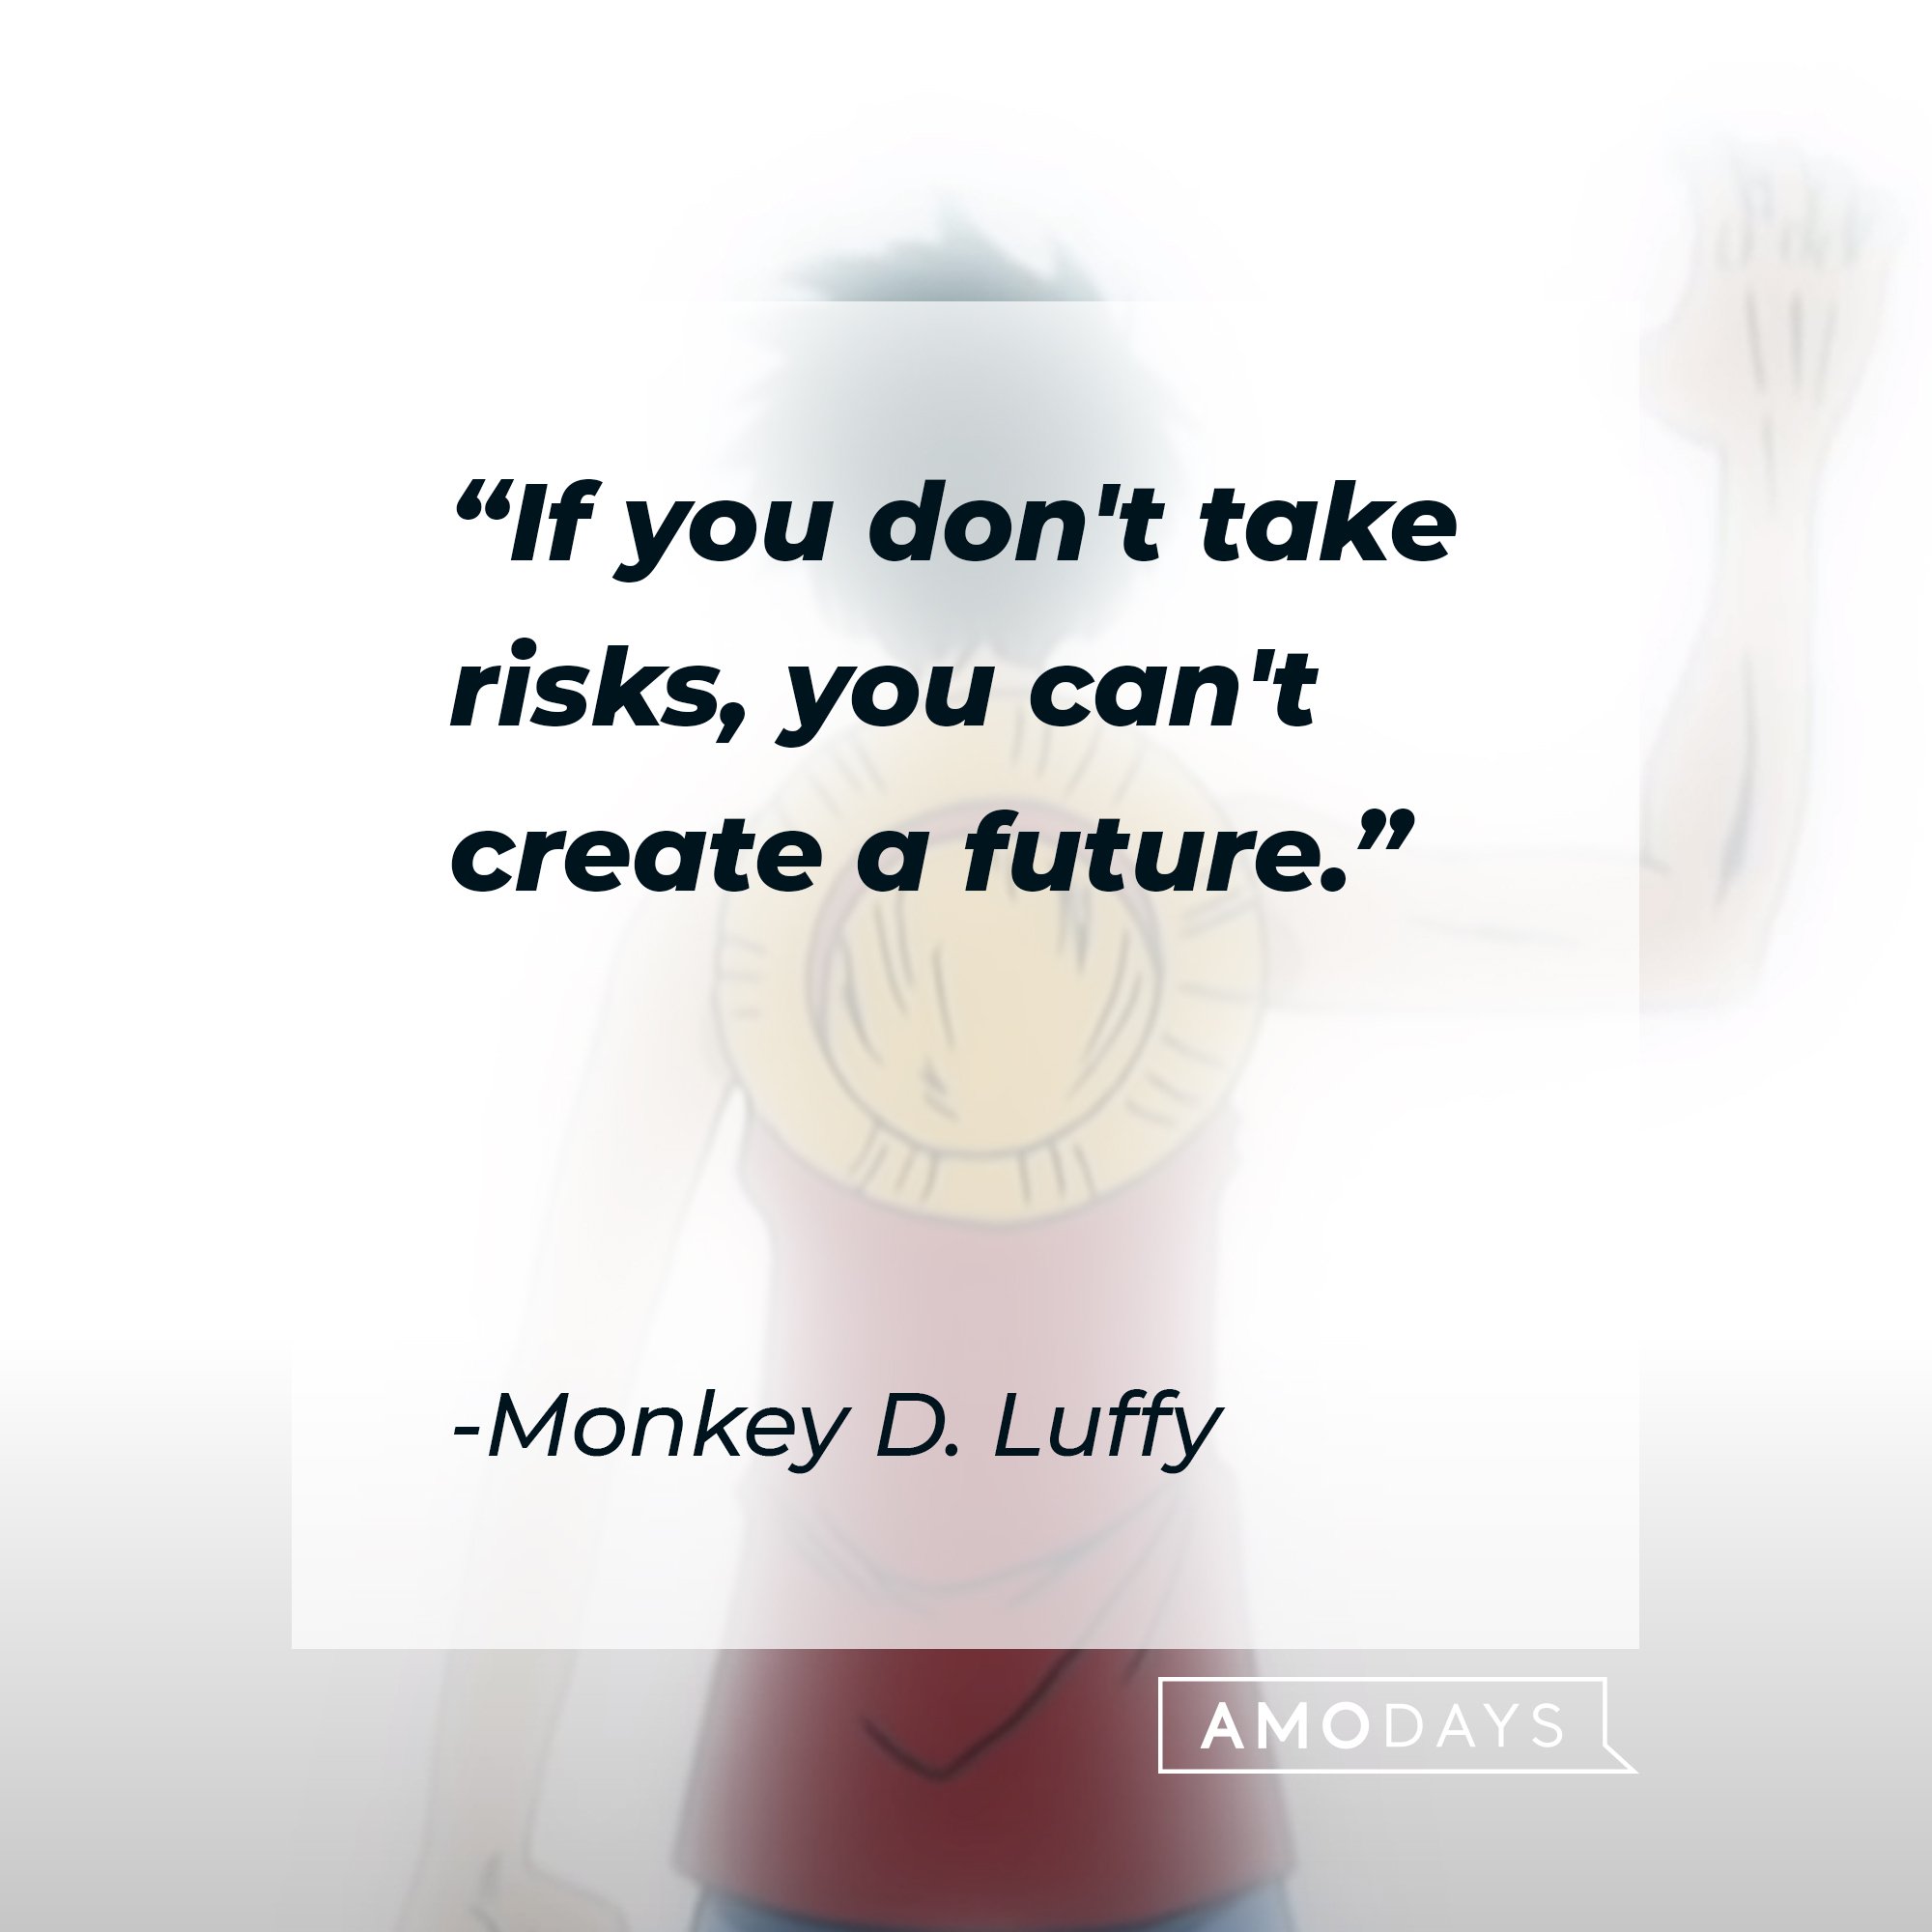 Monkey D. Luffy’s quote: "If you don't take risks, you can't create a future." | Image: AmoDays